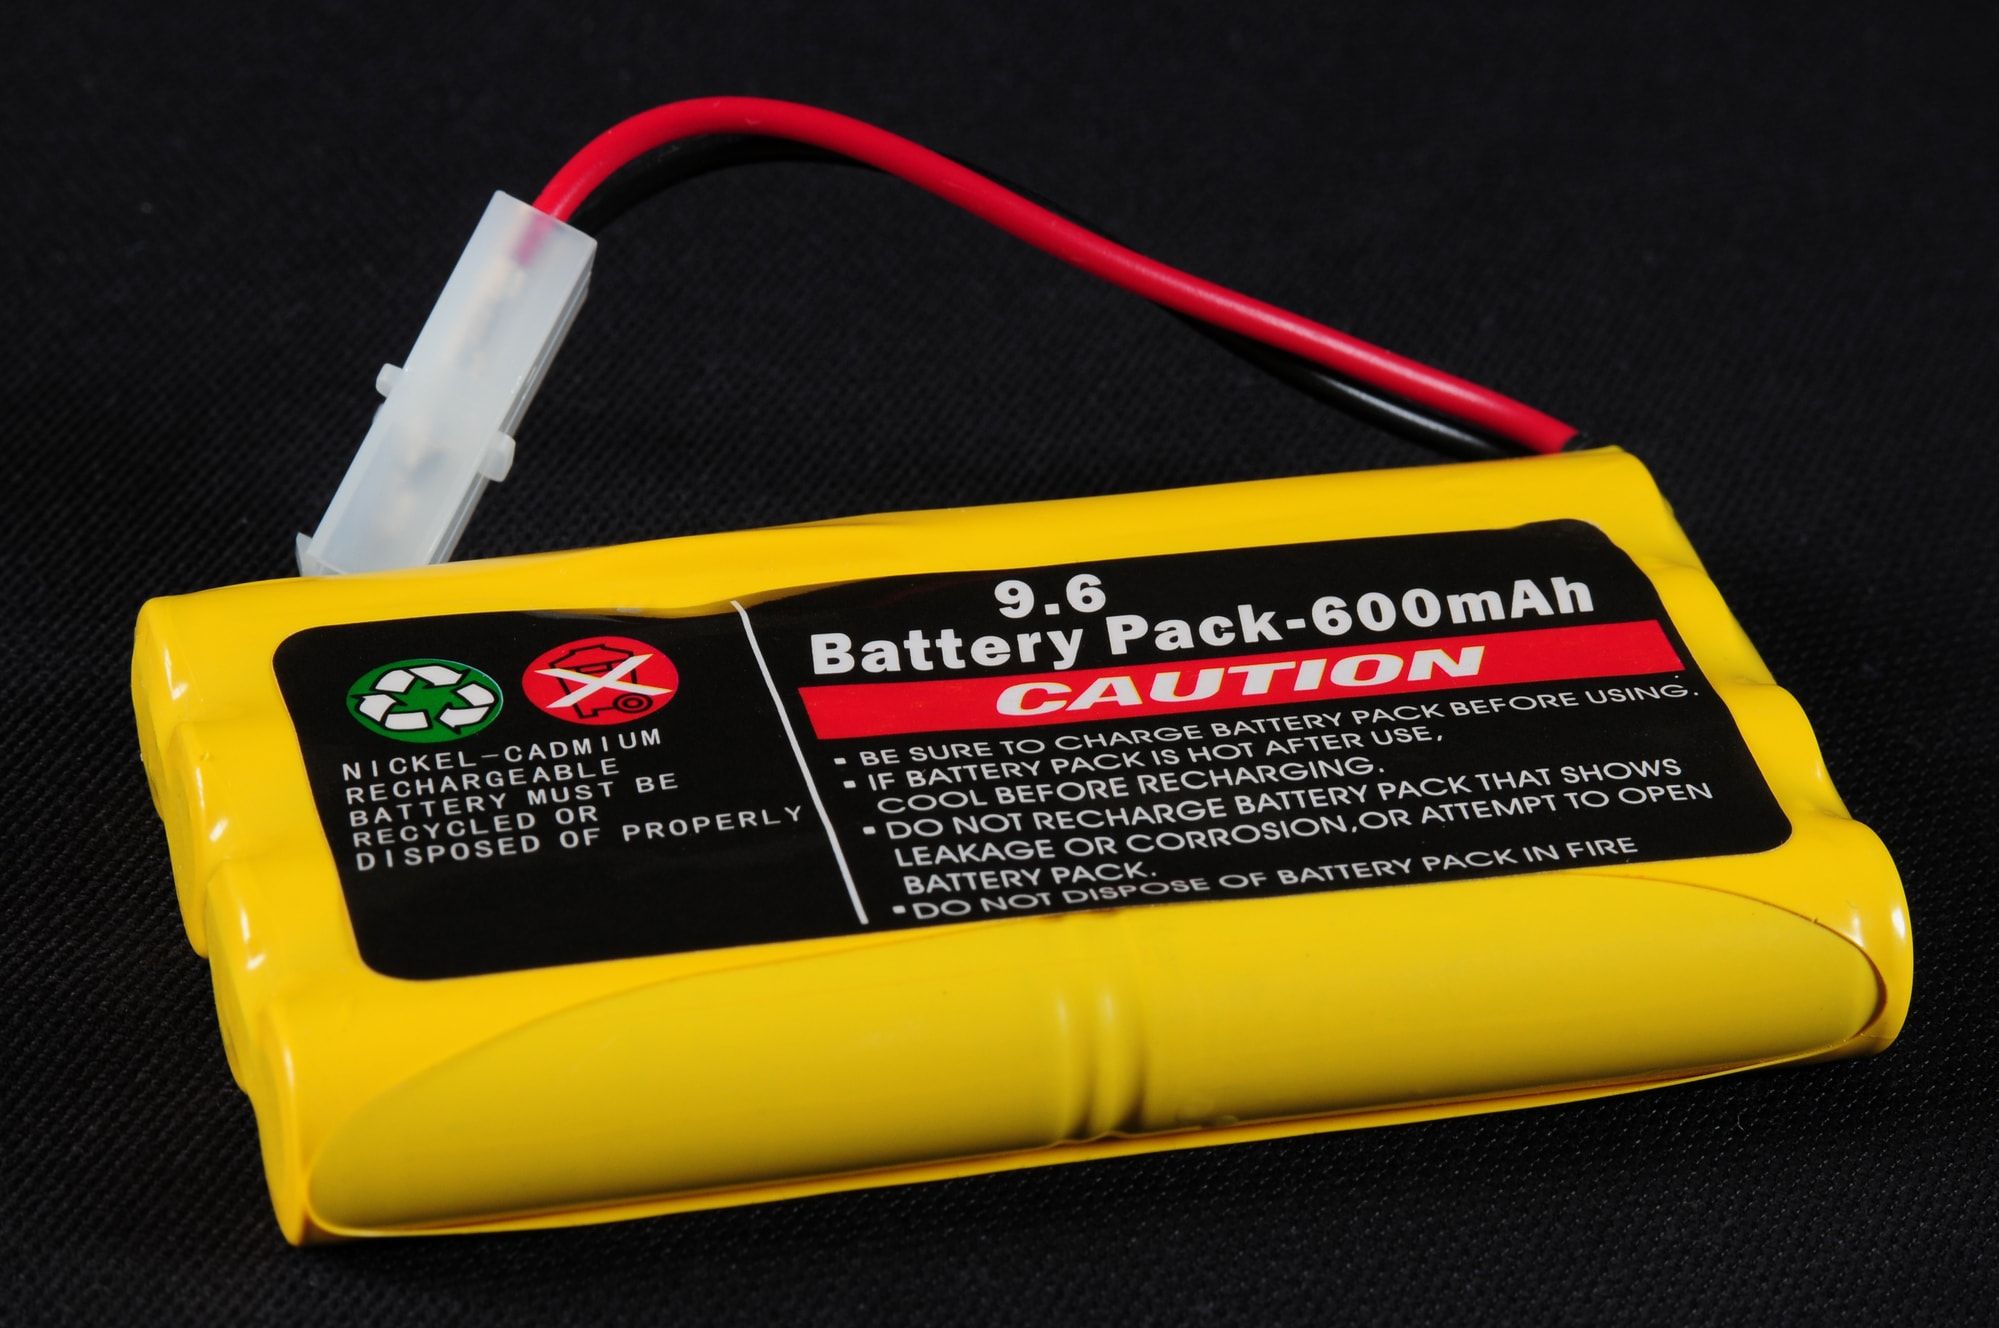 Rechargeable Battery pack.